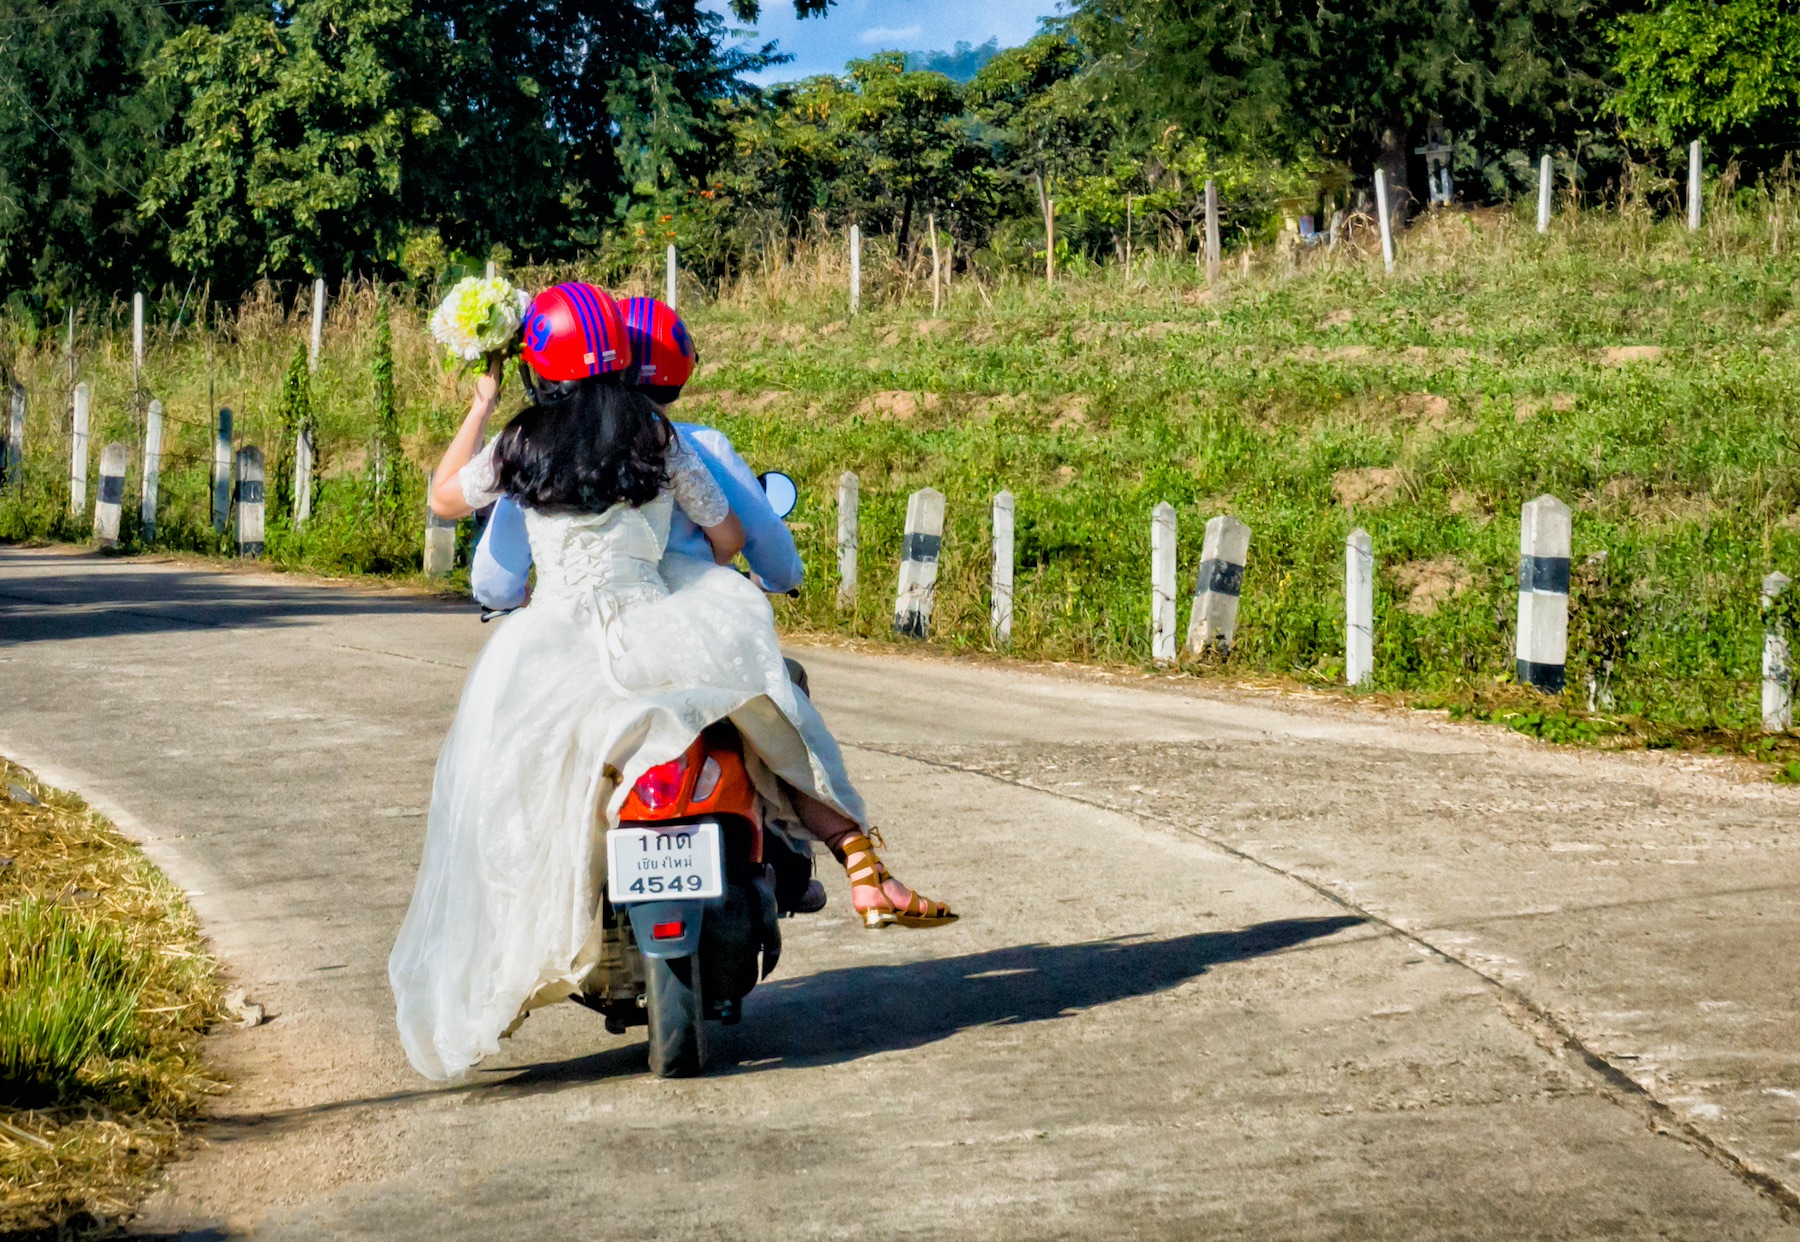 A newlywed couple in their wedding attire ride a motorcycle away from the reception